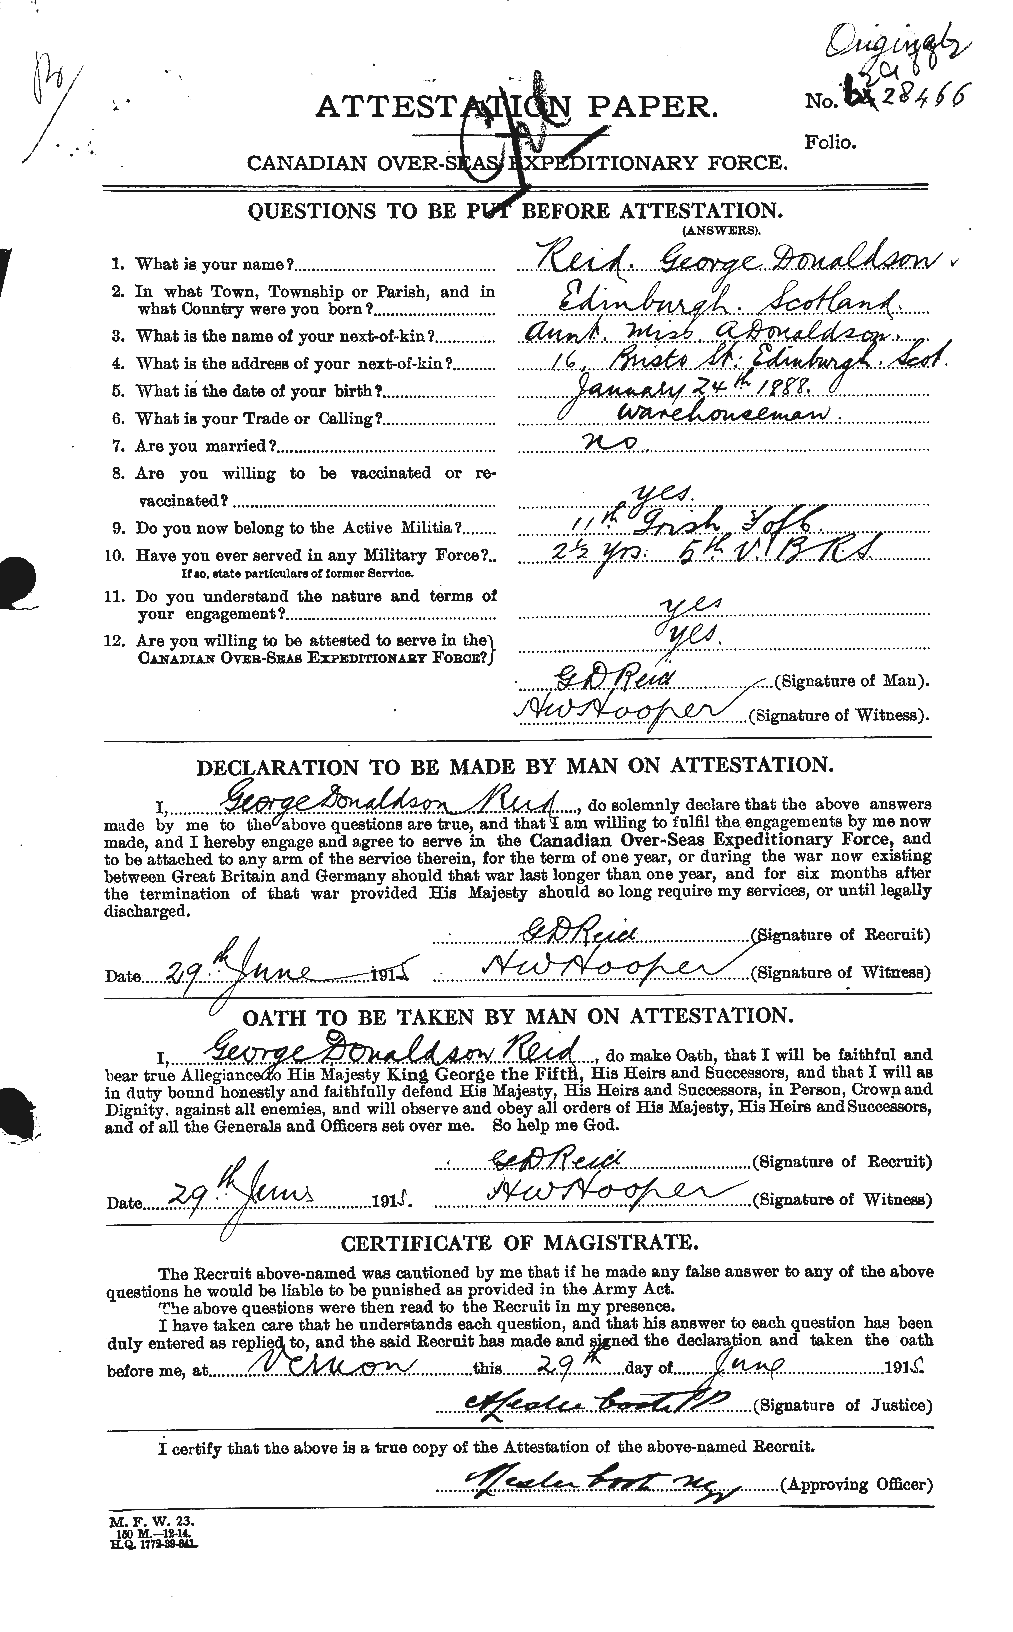 Personnel Records of the First World War - CEF 596290a